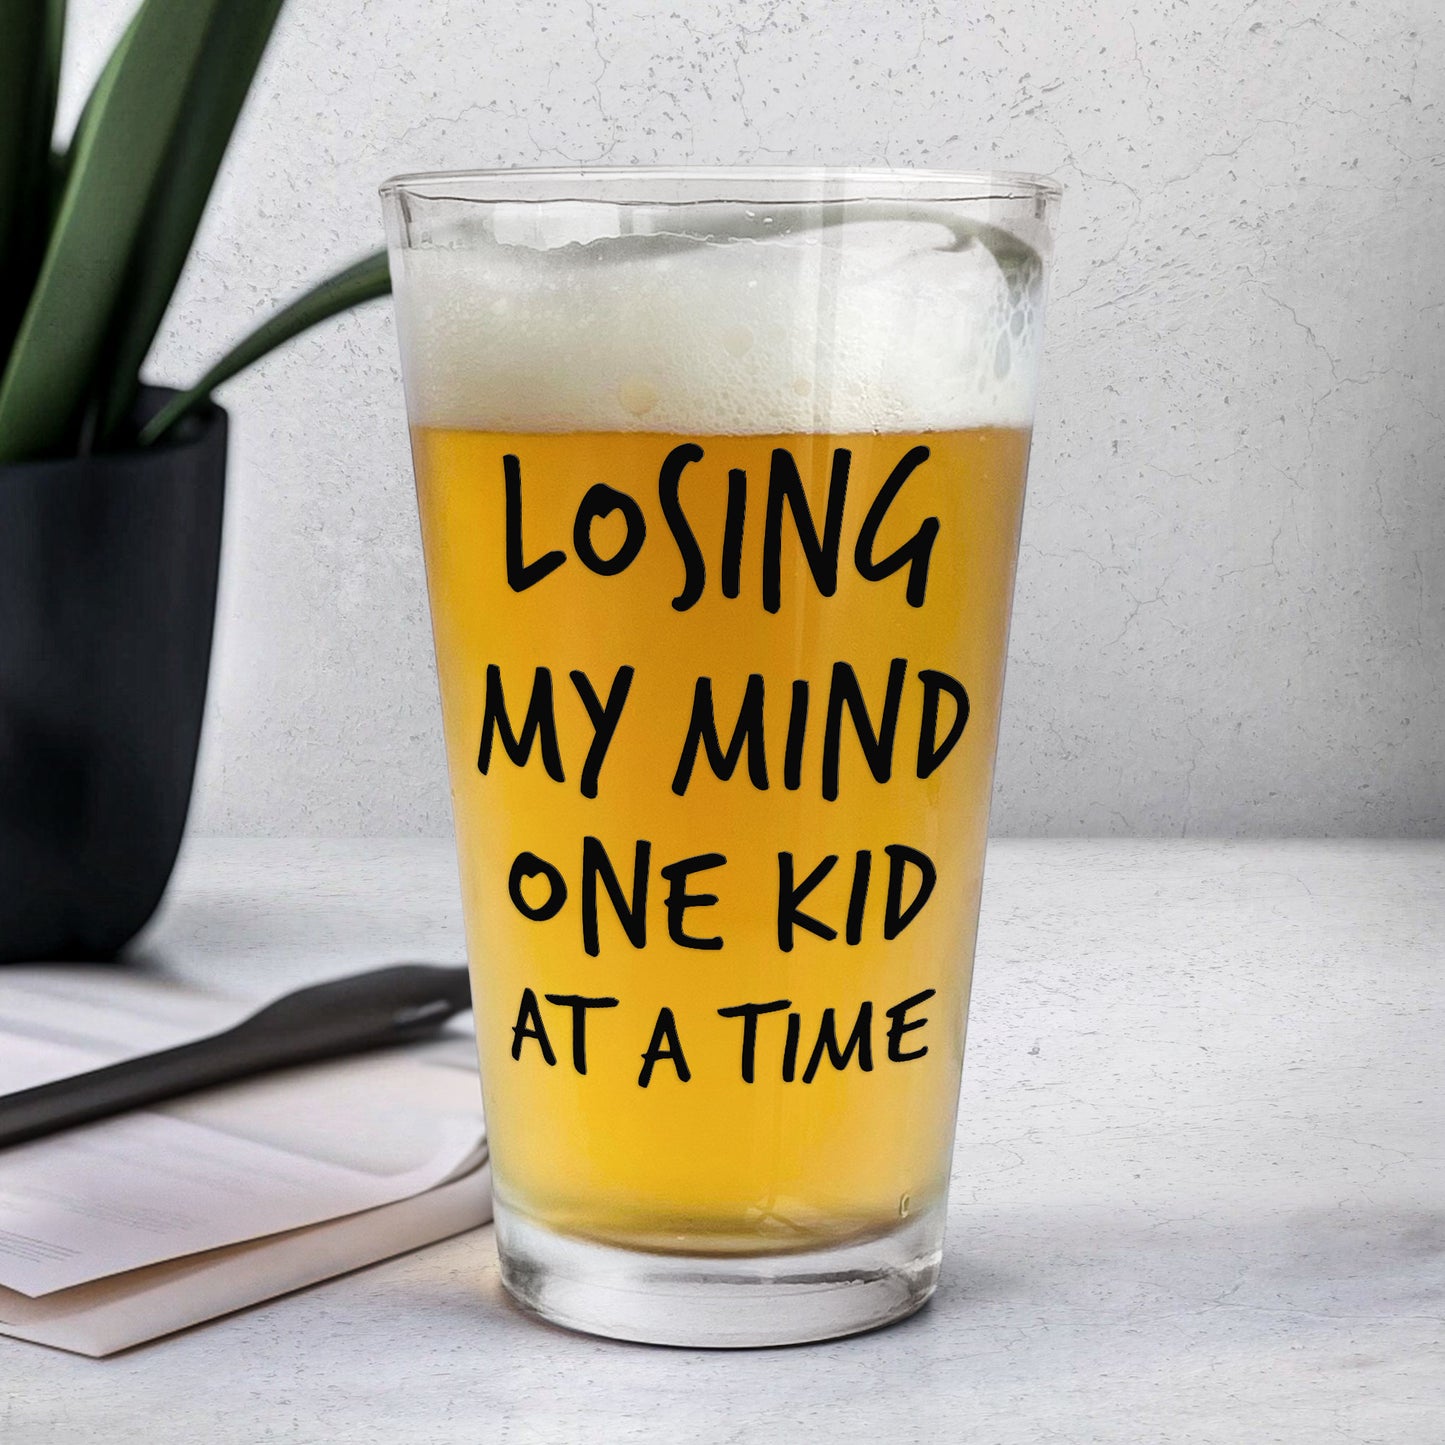 Losing My Mind One Kid At A Time - Personalized Photo Beer Glass